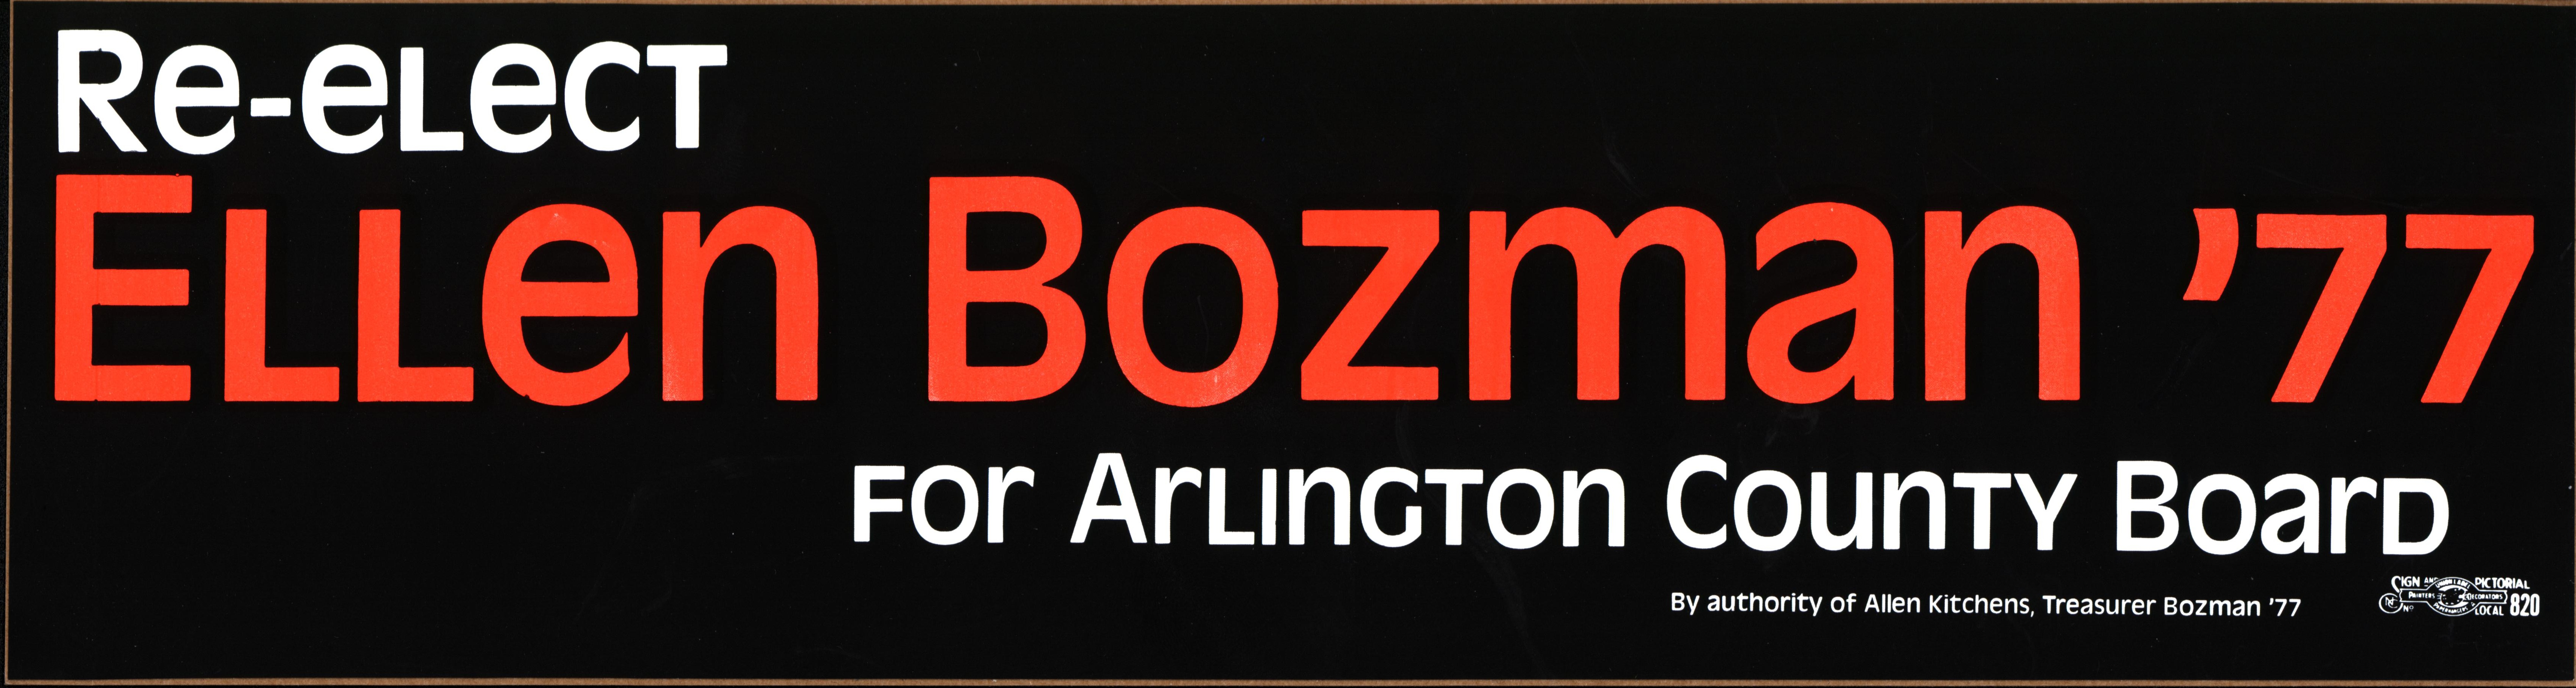 Black bumber sticker with red and white text reads "re-elect Ellen Bozman '77 for Arlington County Board"